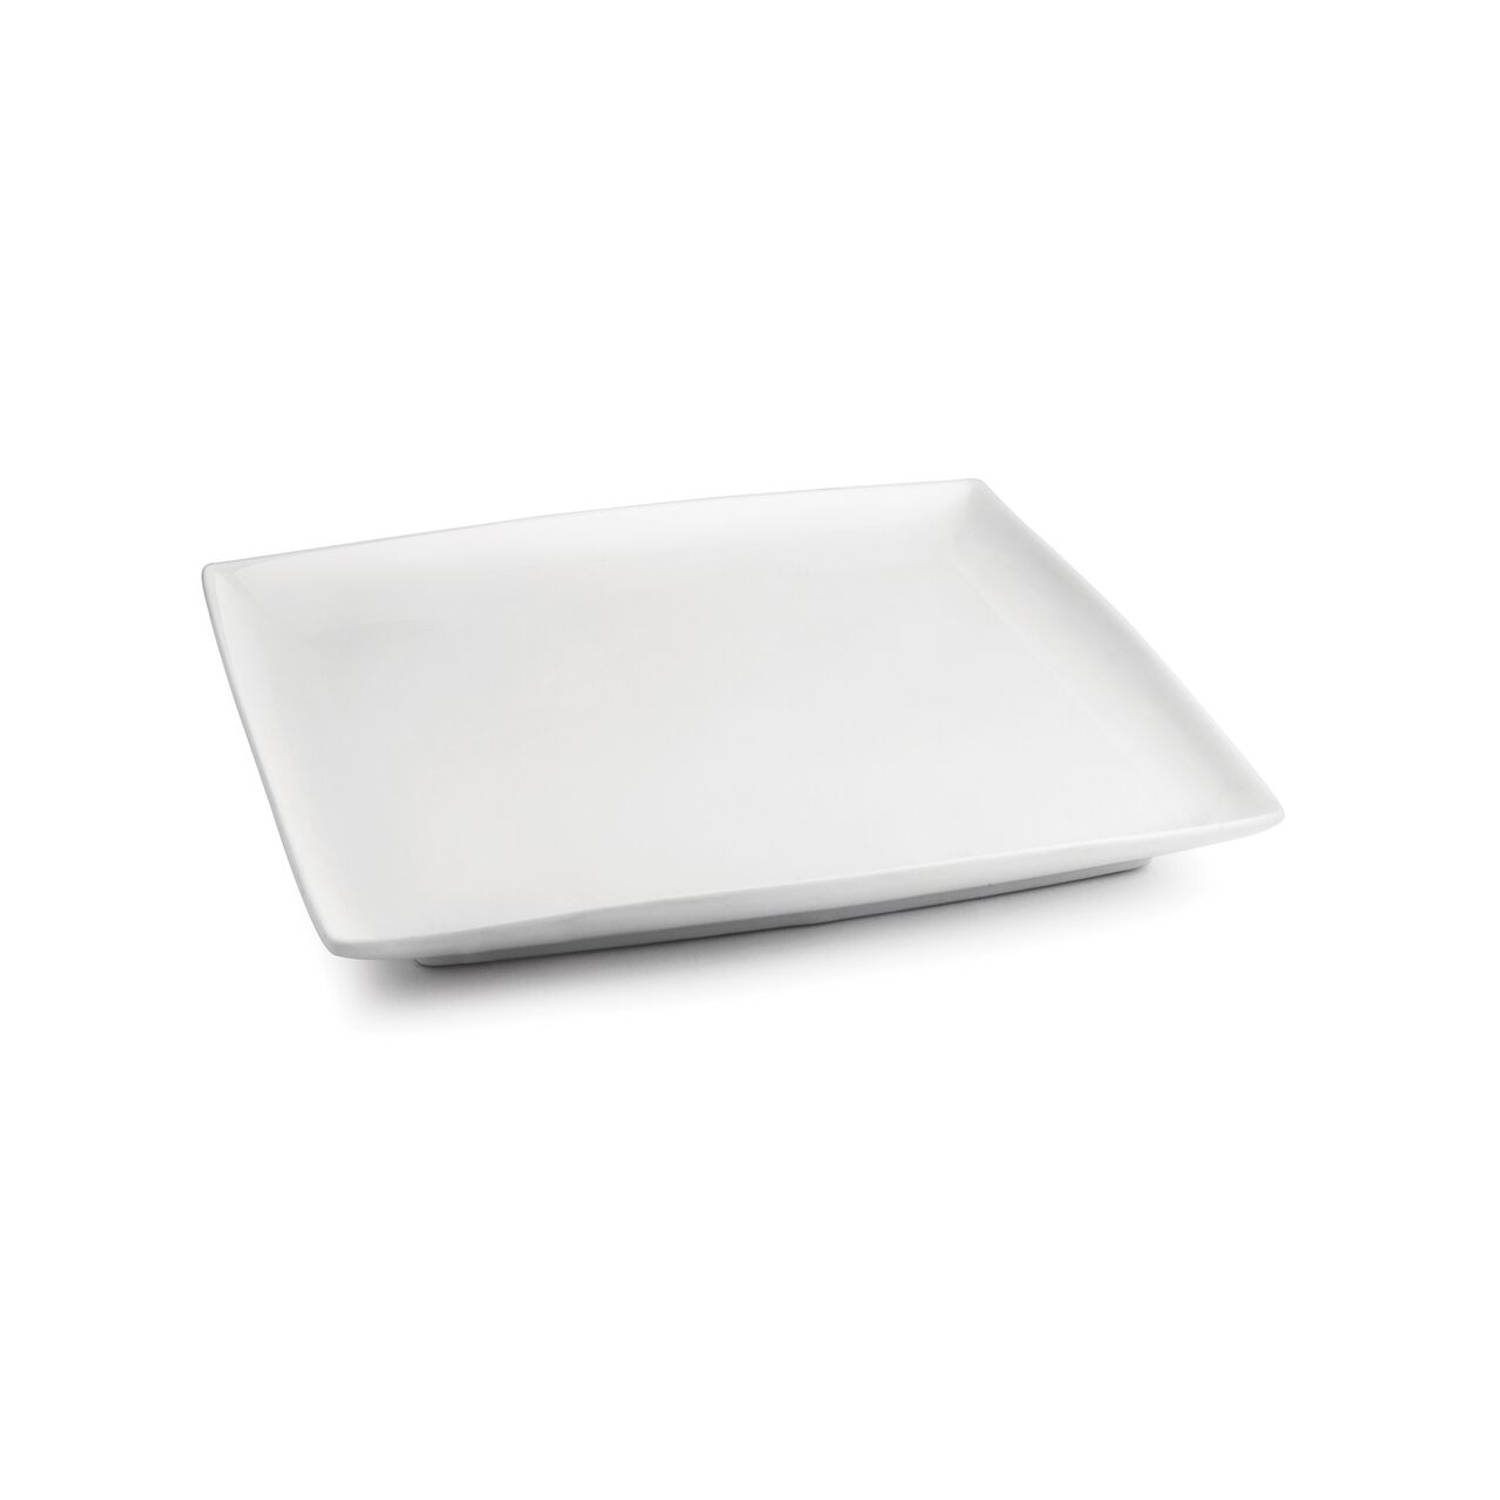 Yong Squito Dinerbord - 23 x 23 cm - Plat - Wit